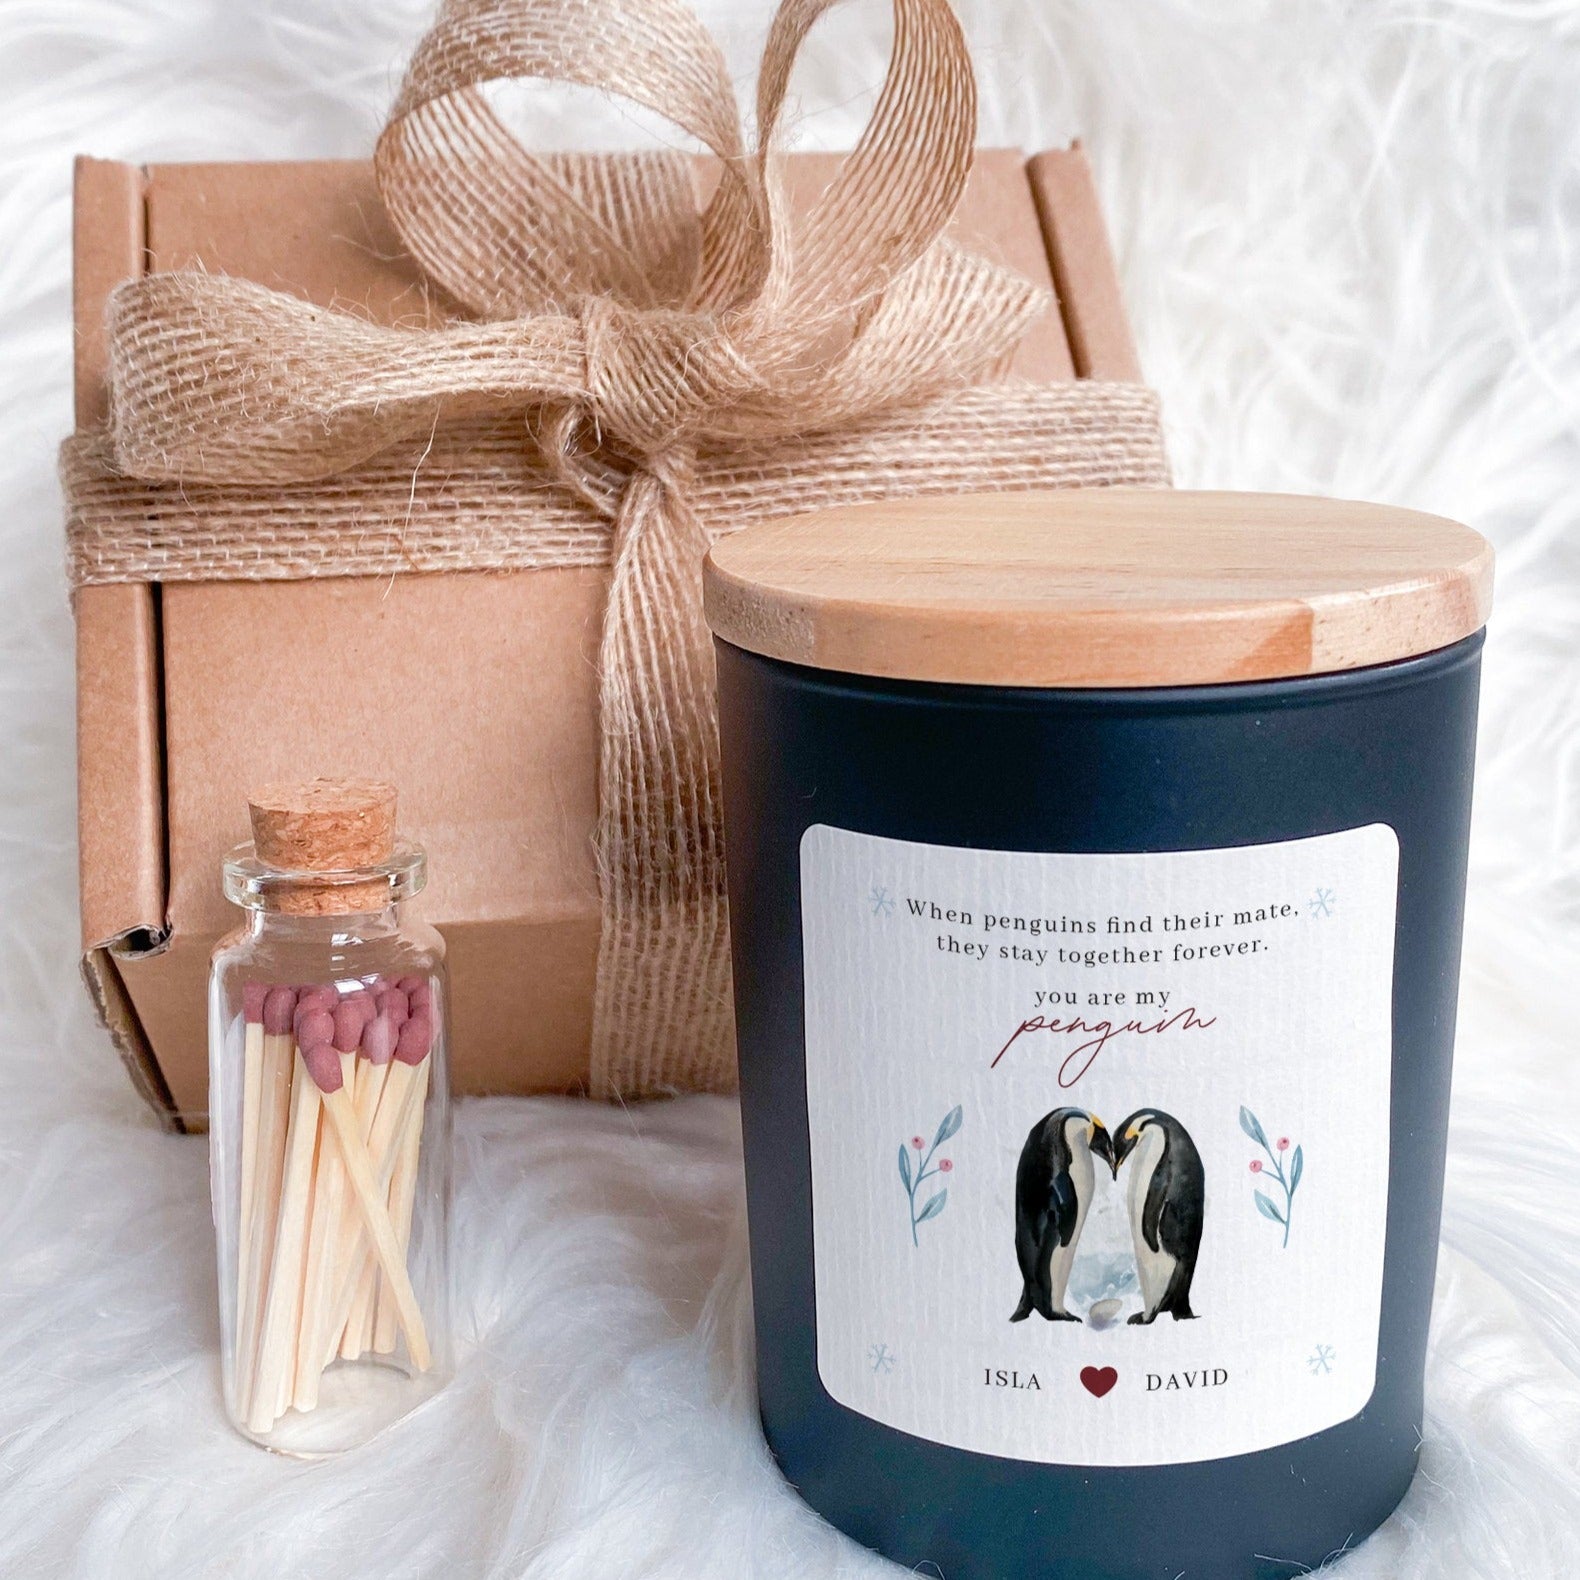 Personalised Candle Set with Couple Names You Are My Penguin Gift for Wife Her Husband Girlfriend Fiance Valentine's Day Birthday Christmas happyinky